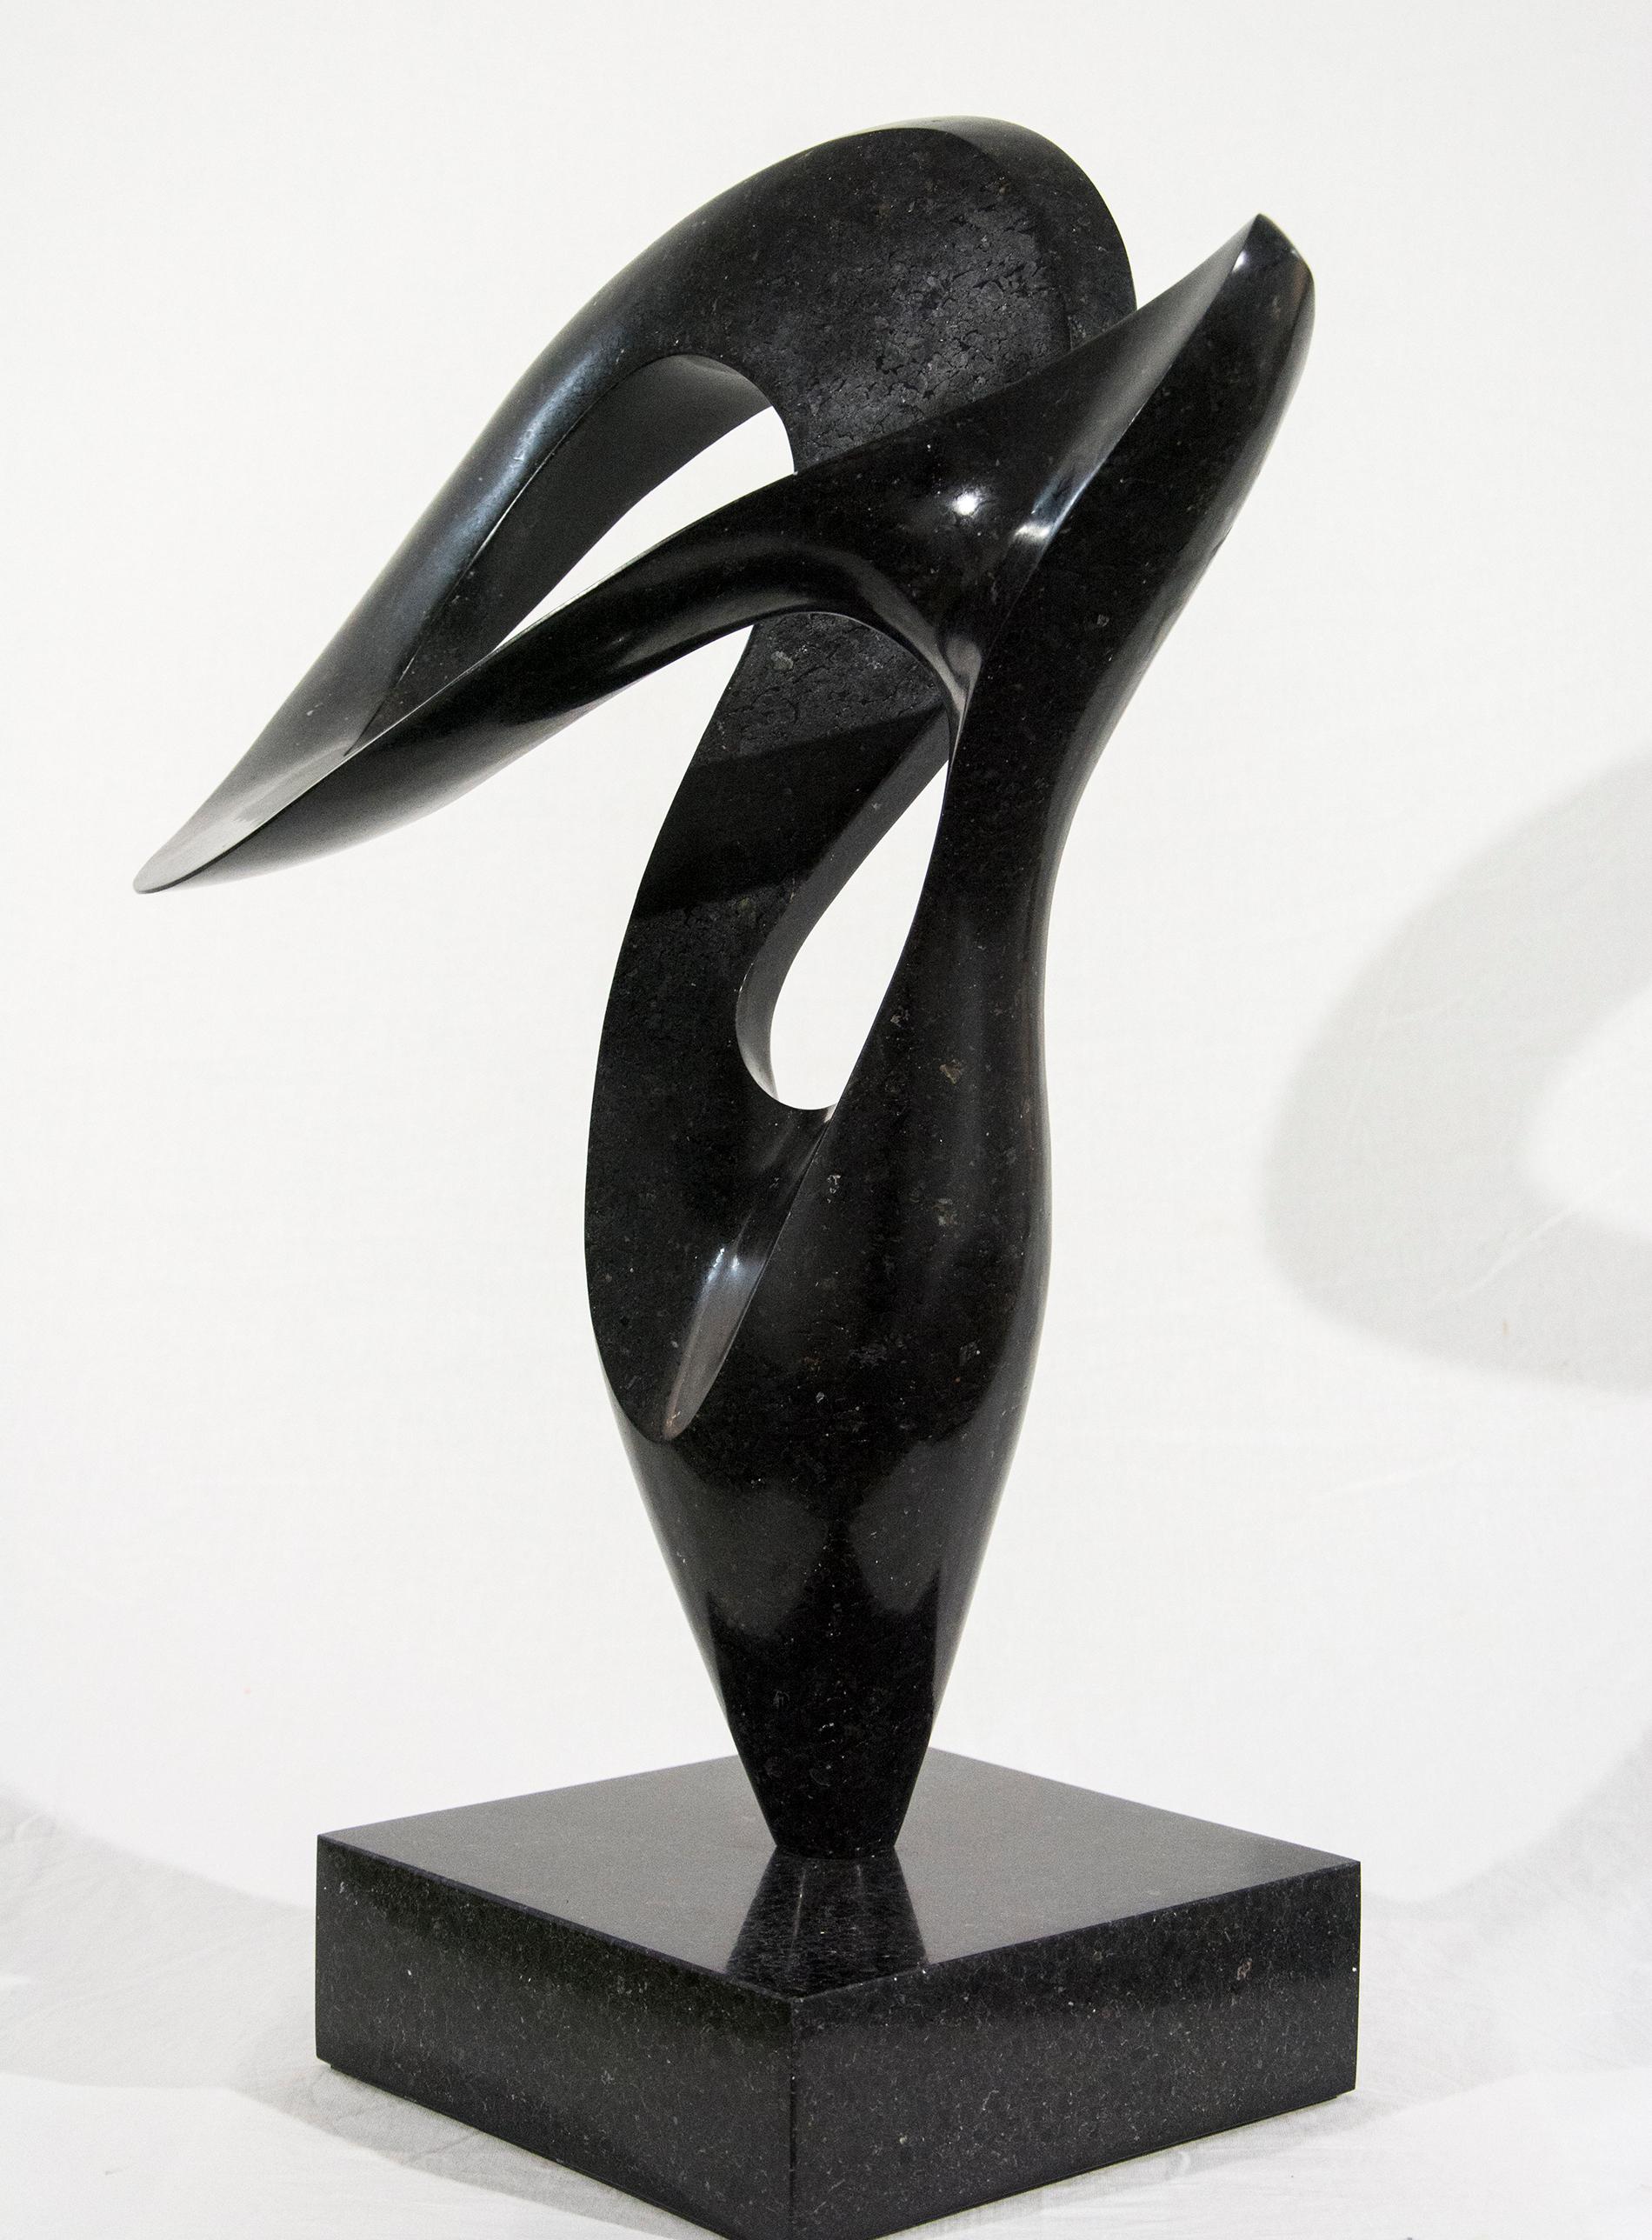 Pirouette 19/50 - smooth, black, granite, indoor/outdoor, abstract sculpture - Contemporary Sculpture by Jeremy Guy